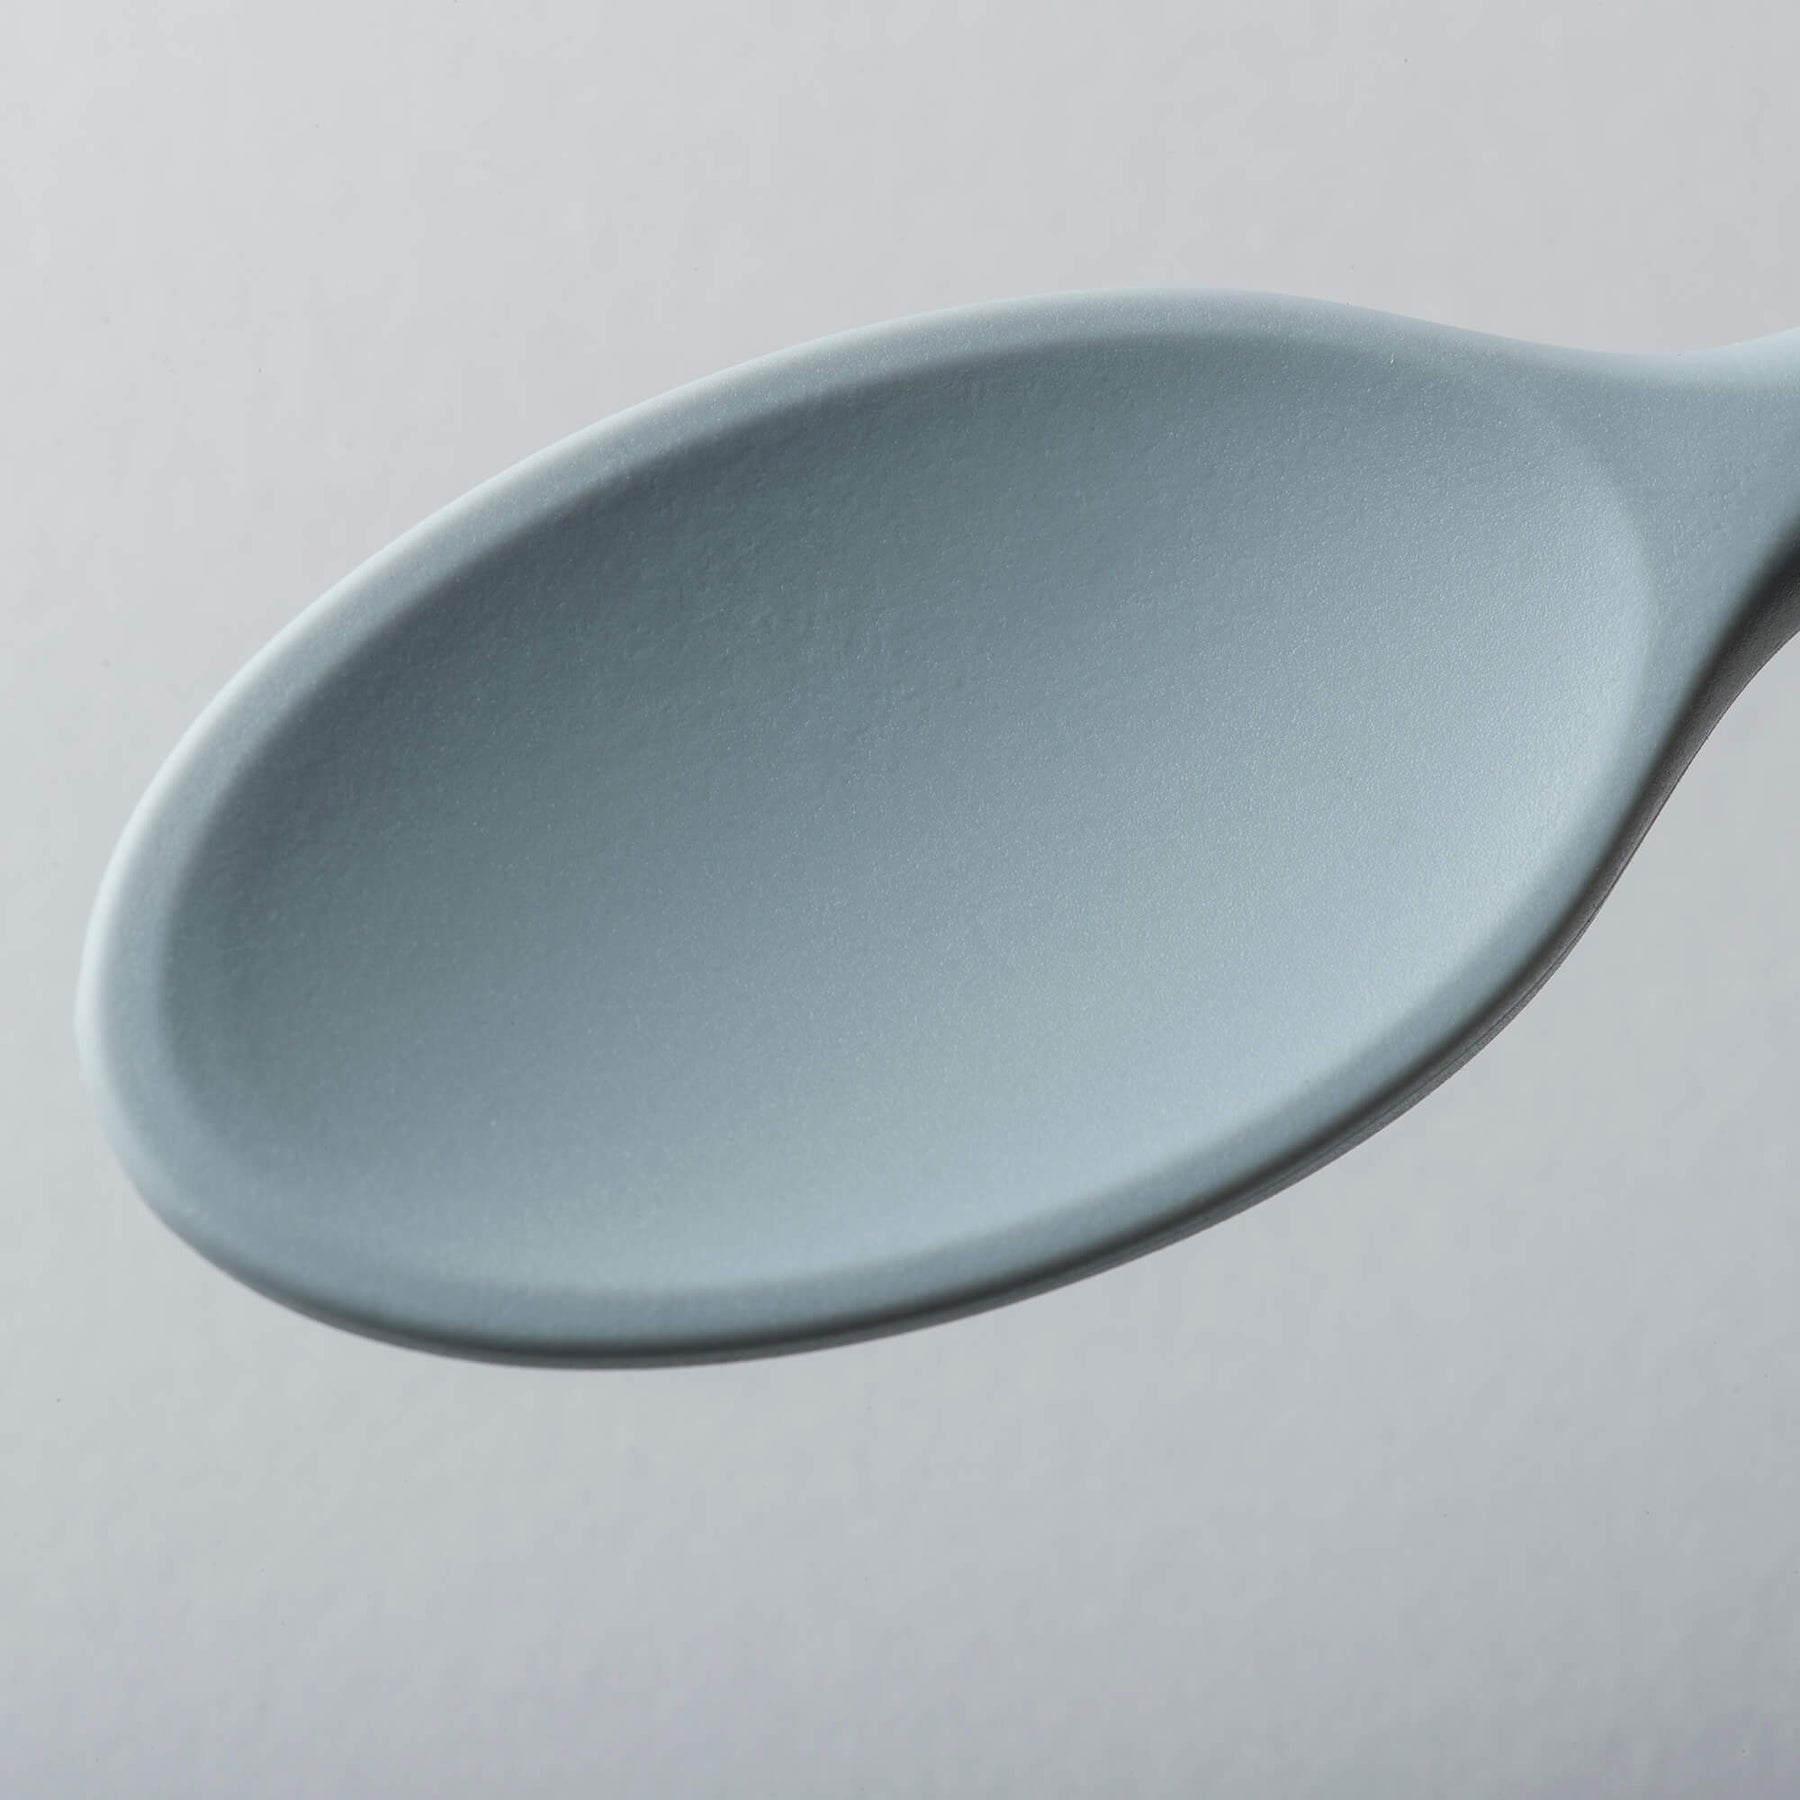 Traditional Silicone Cook’s Spoon, 30cm